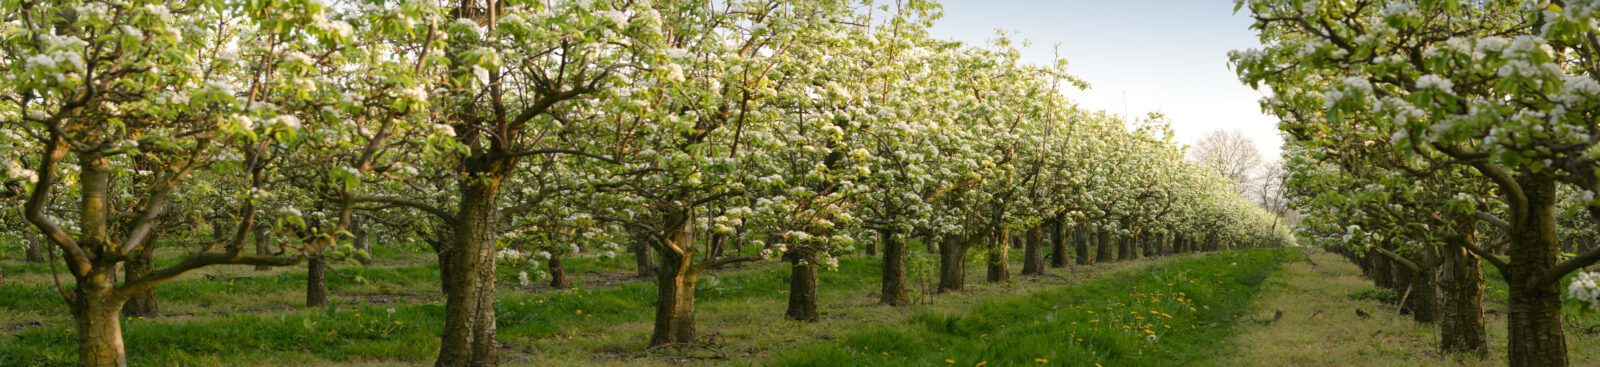 Image of Pluckley tree blossom